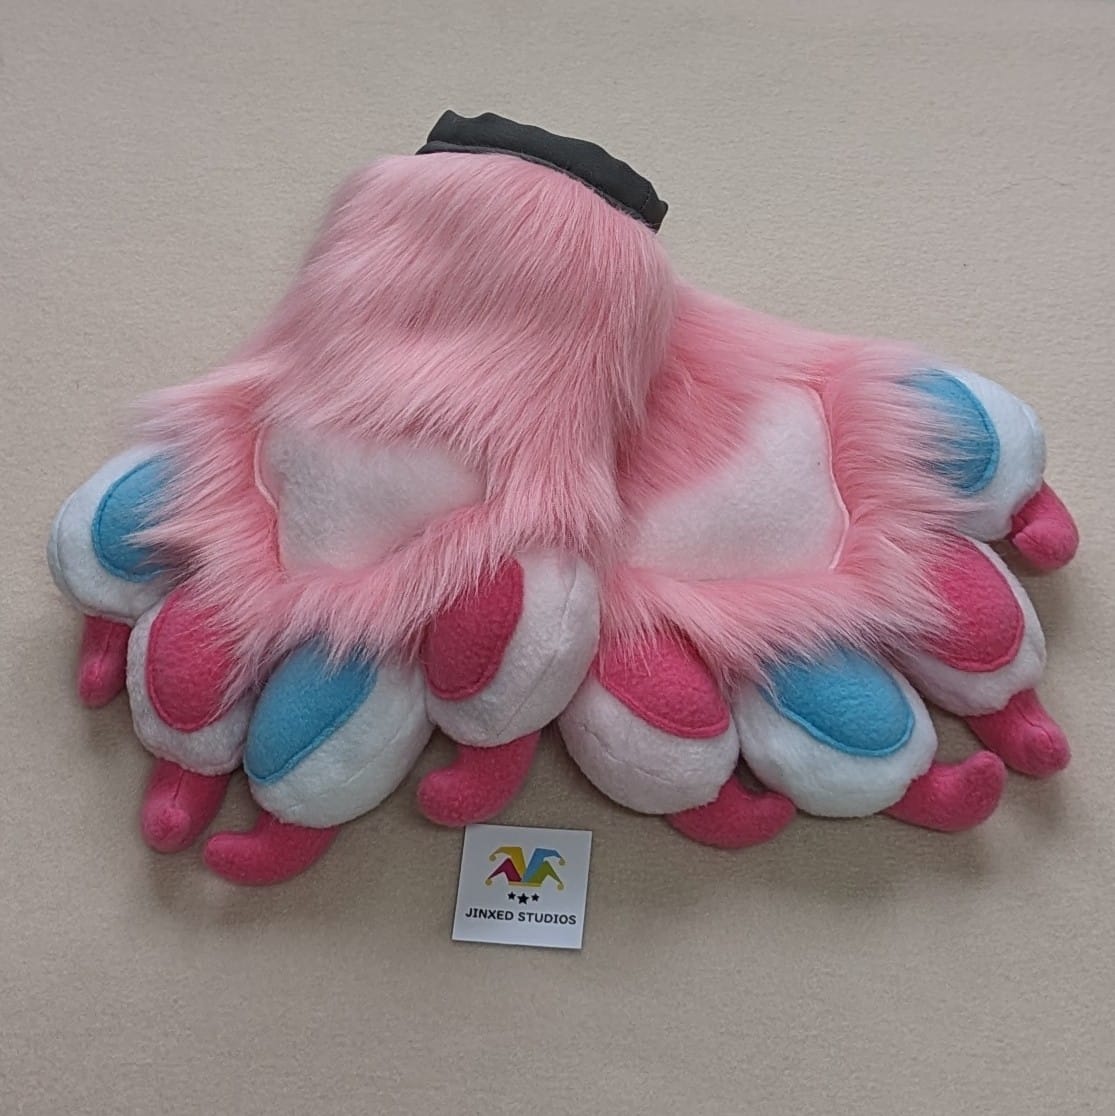 Hand Paws "Pink heart" Special Edition!